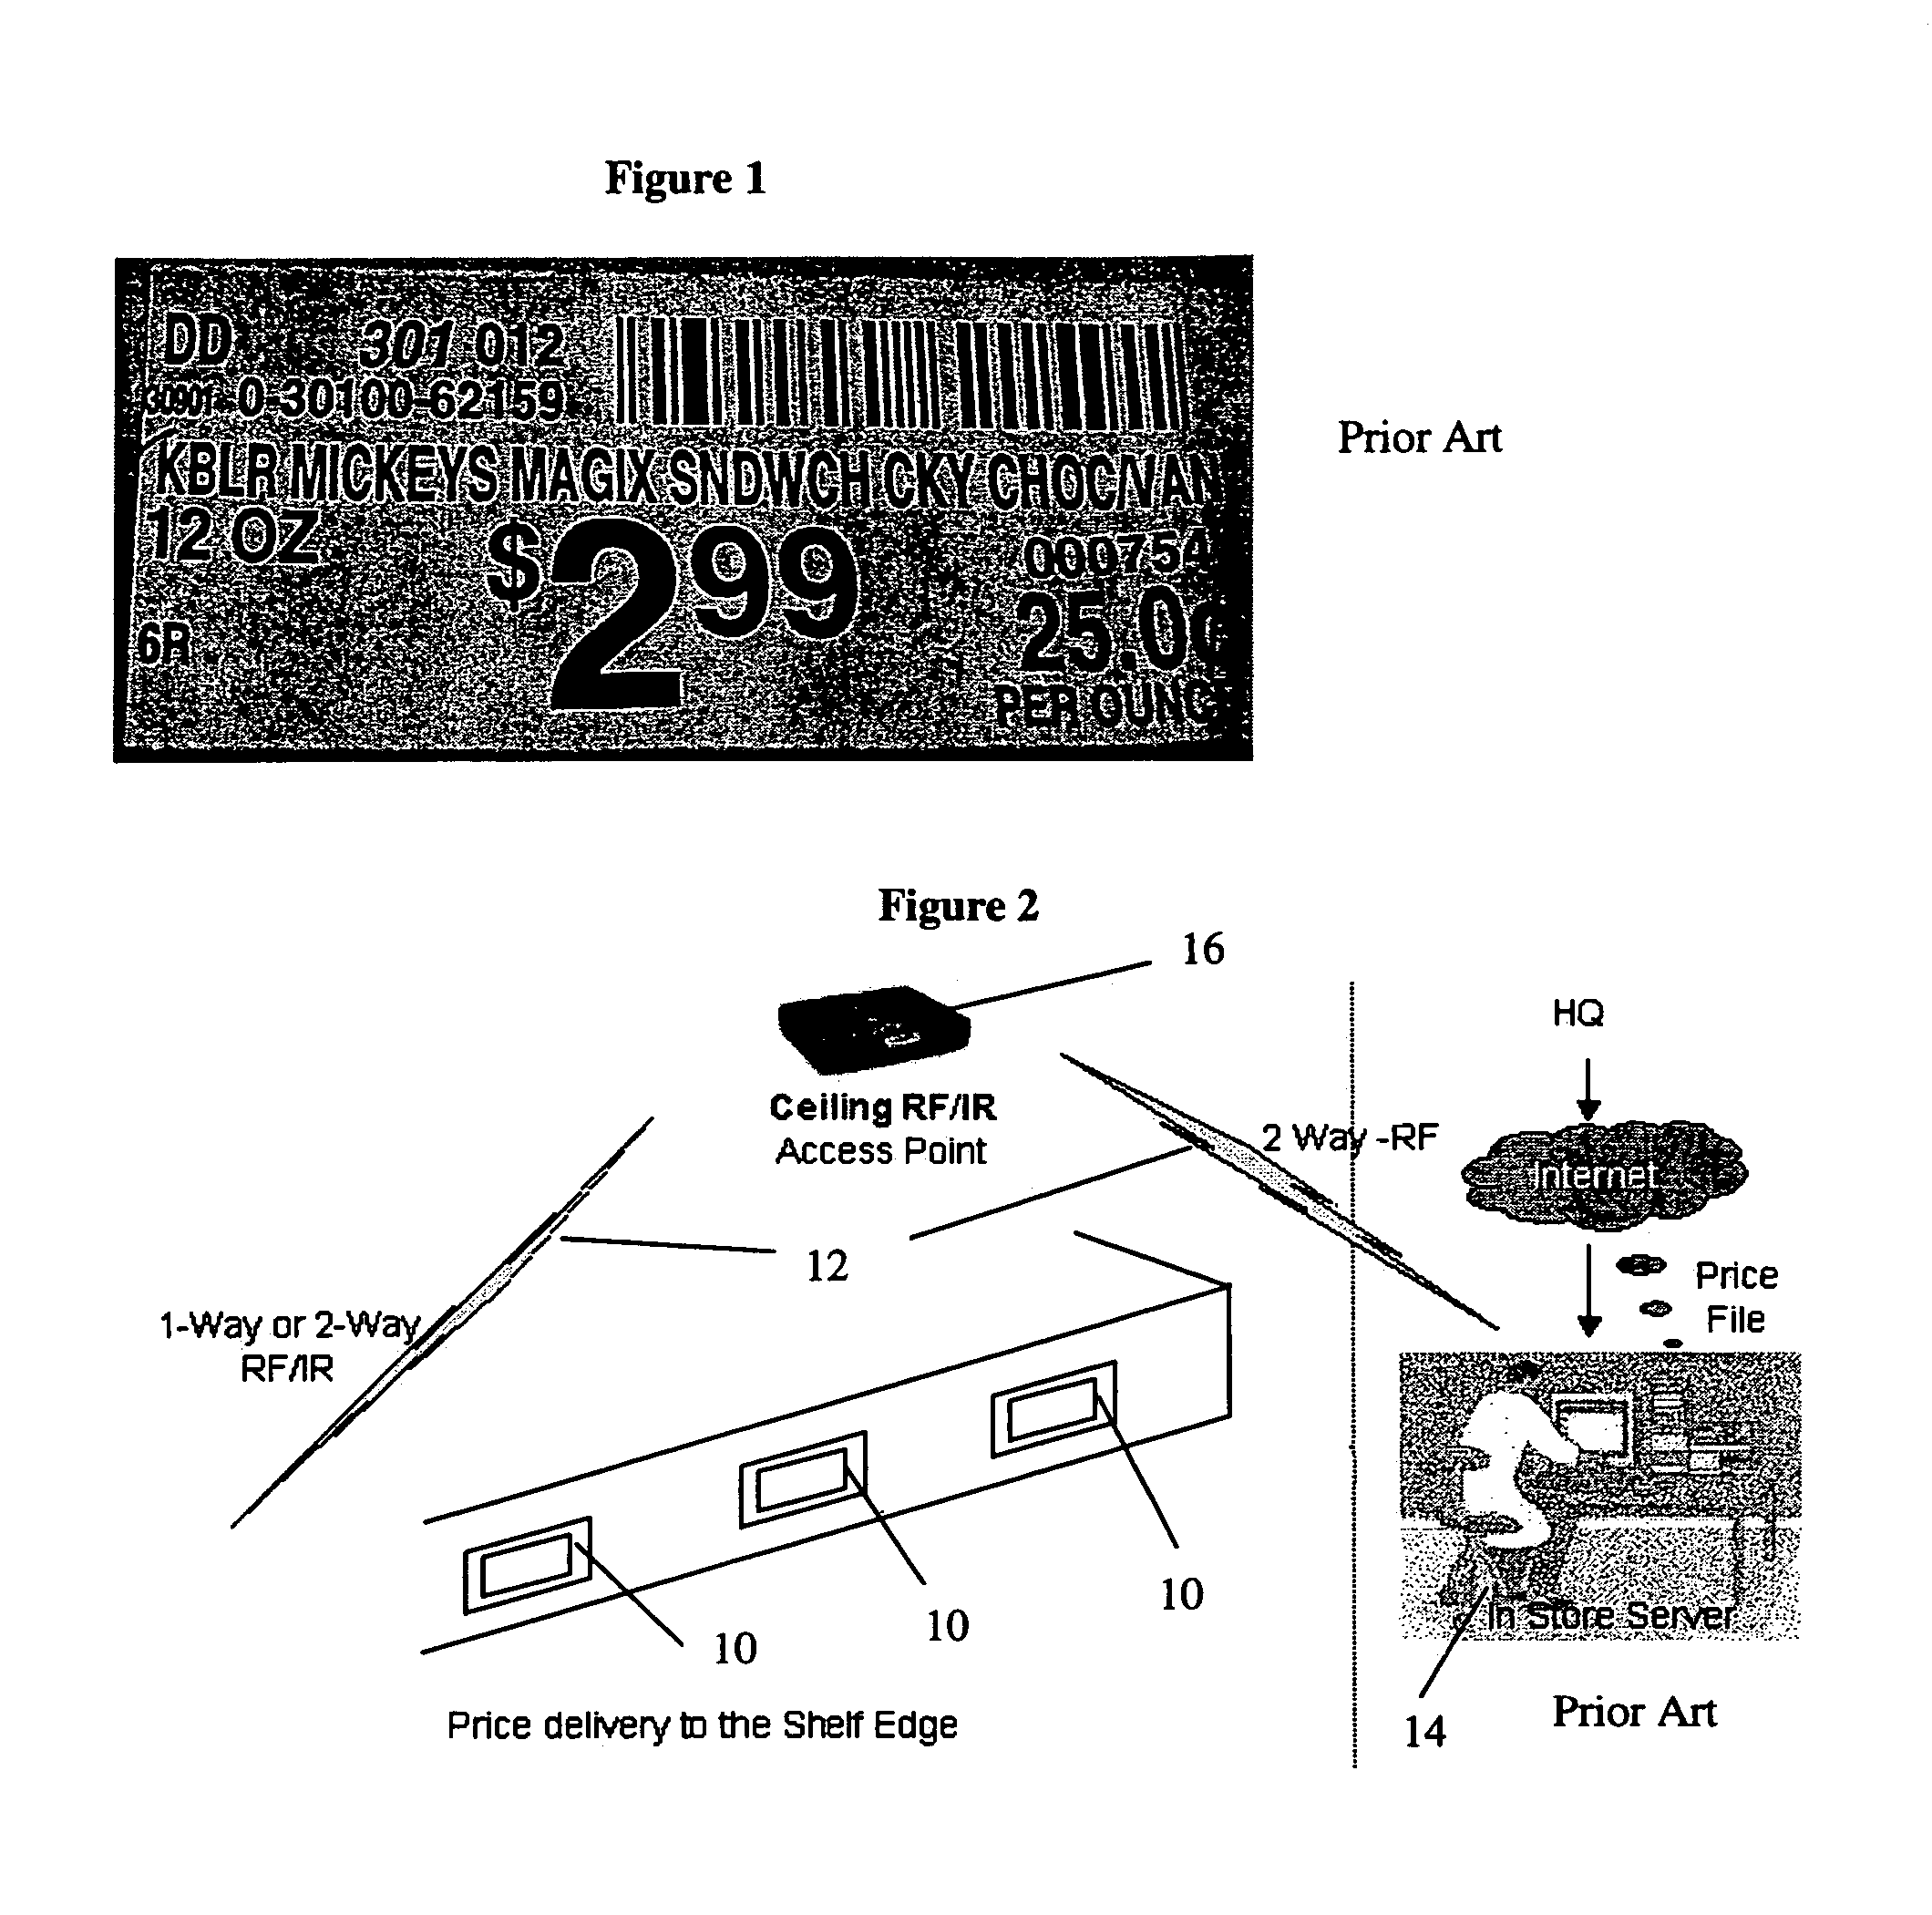 Multi-use wireless display tag infrastructure and methods